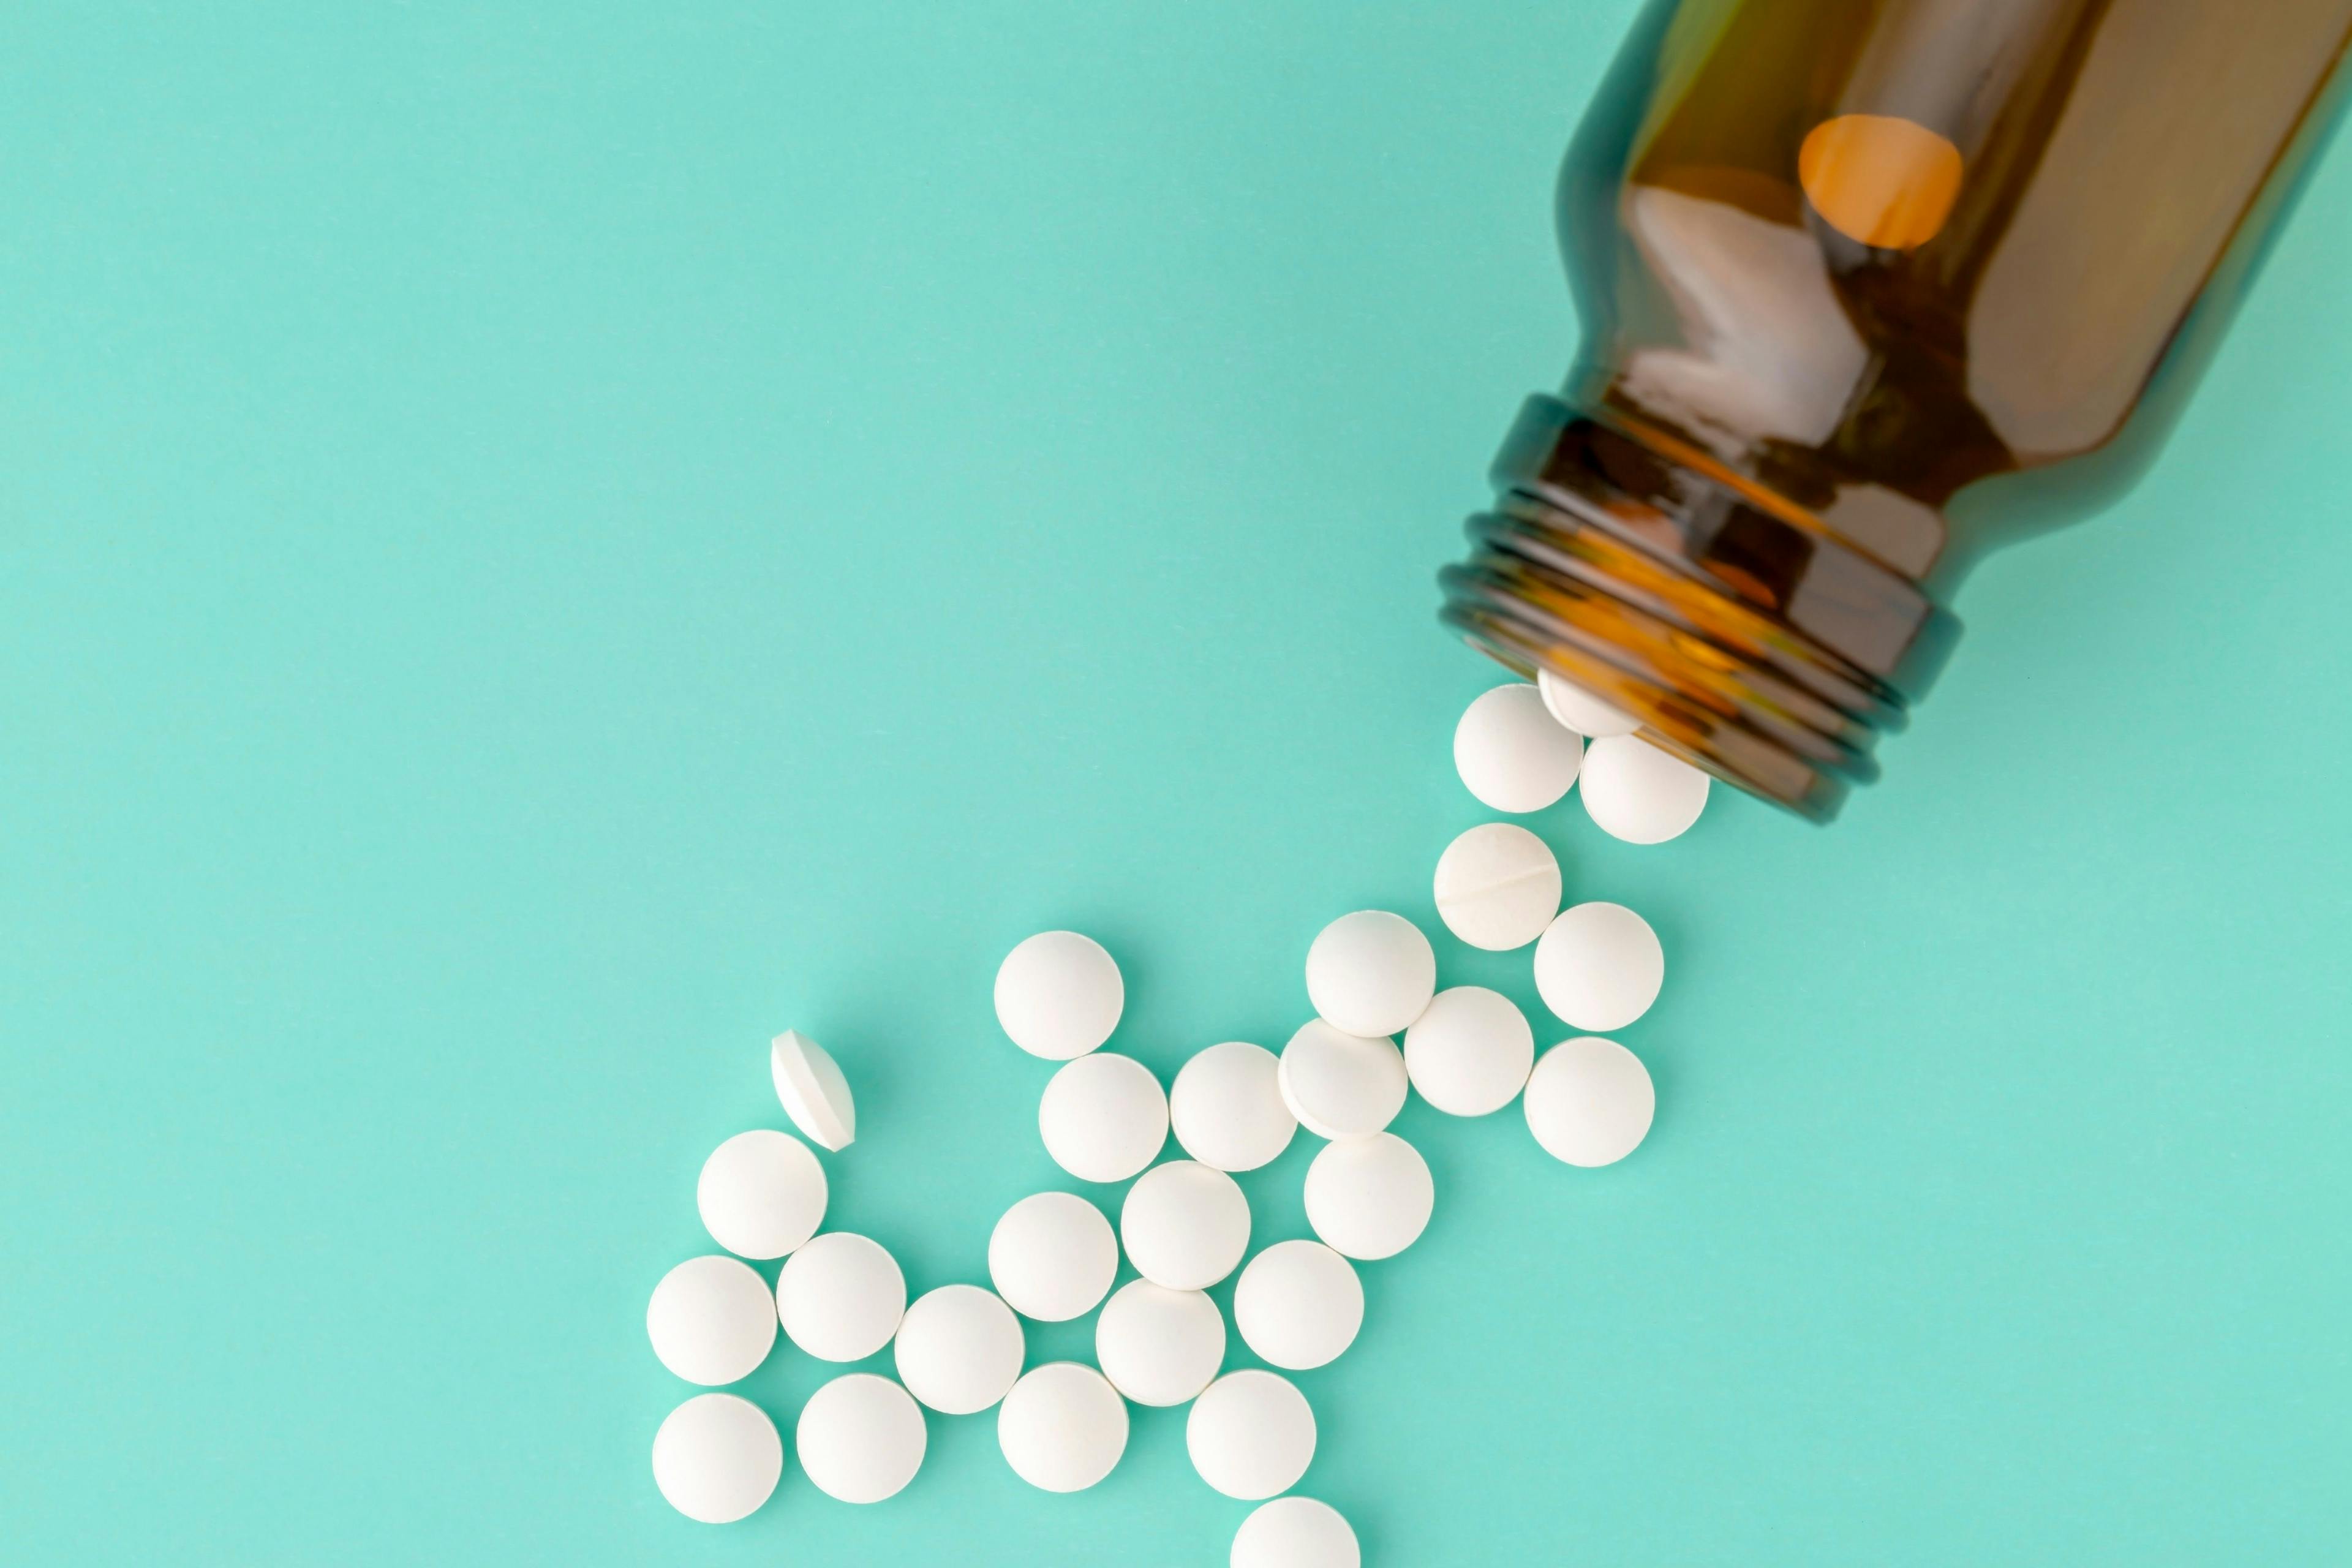 White round tablets scattered near glass bottle of pills | Image Credit: © ironstealth - stock.adobe.com